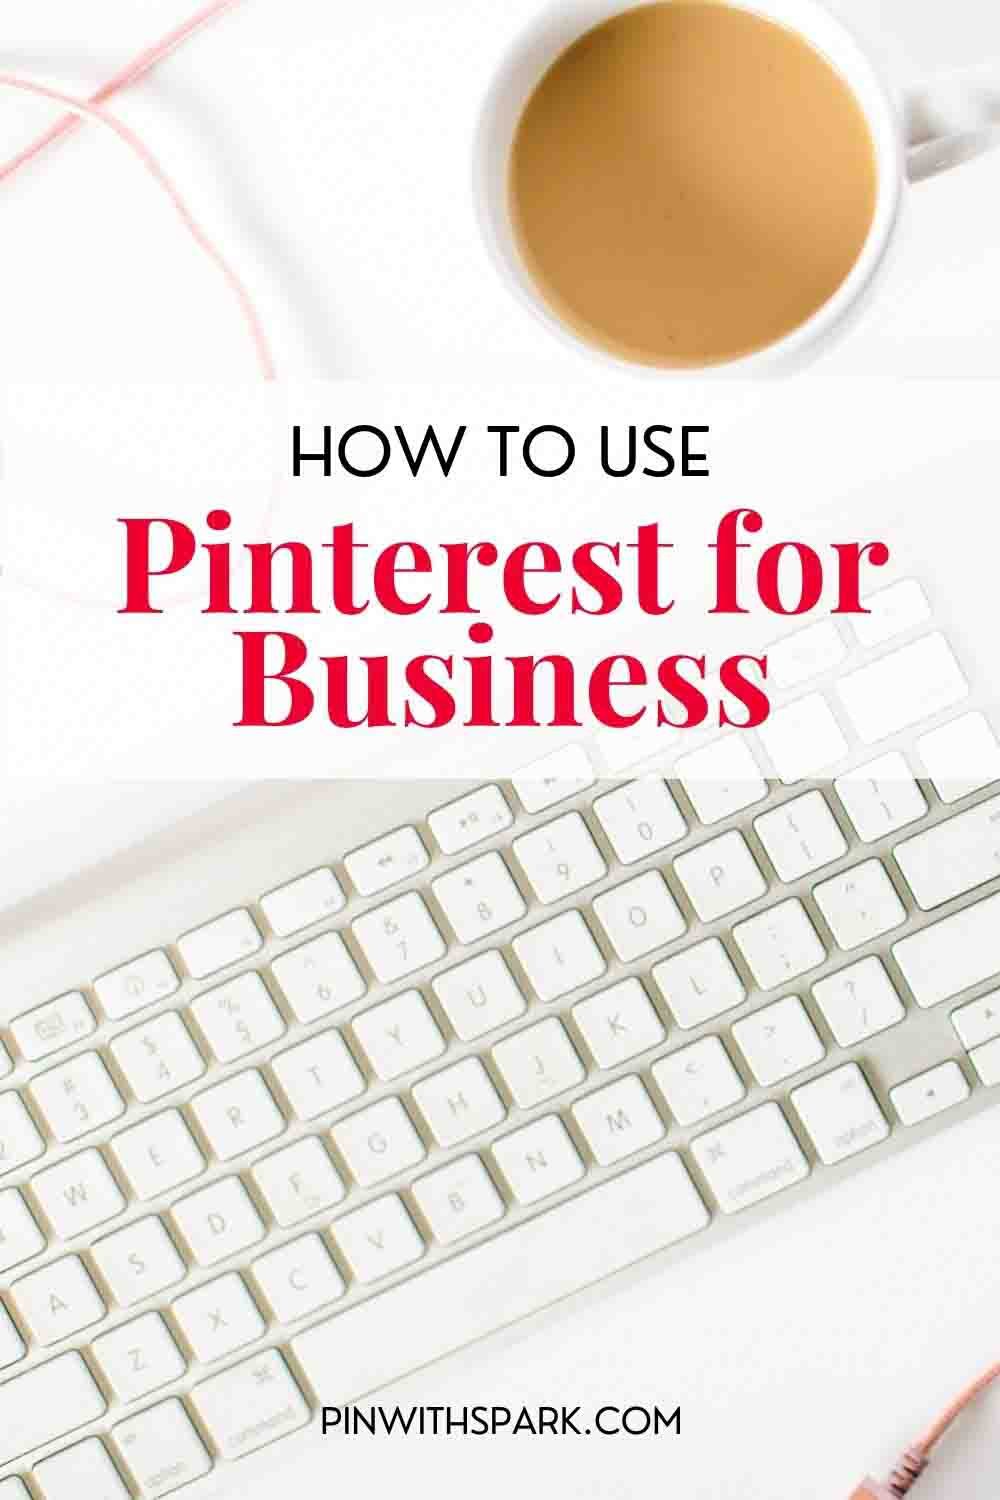 How to use pinterest for business text overlay with keyboard and coffee on tabletop pinwithspark.com